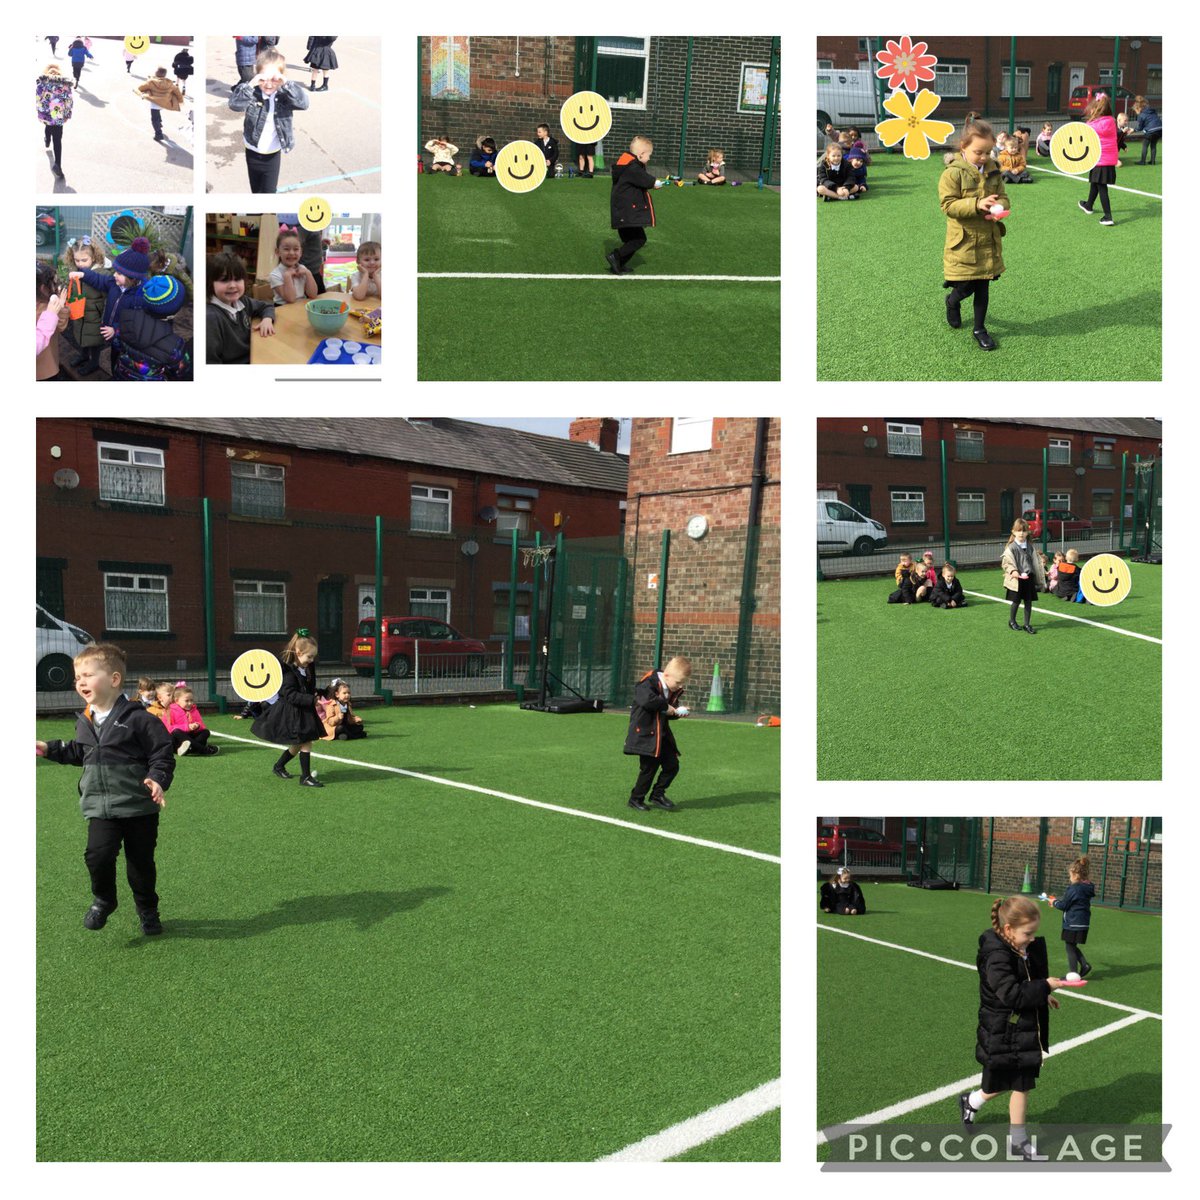 Reception have had an exciting start to Easter 🐣 they have played bingo, tombola, egg and spoon race and had an Easter egg hunt. I am looking forward to seeing all your lovely Easter Bonnets for the parade tomorrow 🌟 @parishschool1 #Parishearlyyears